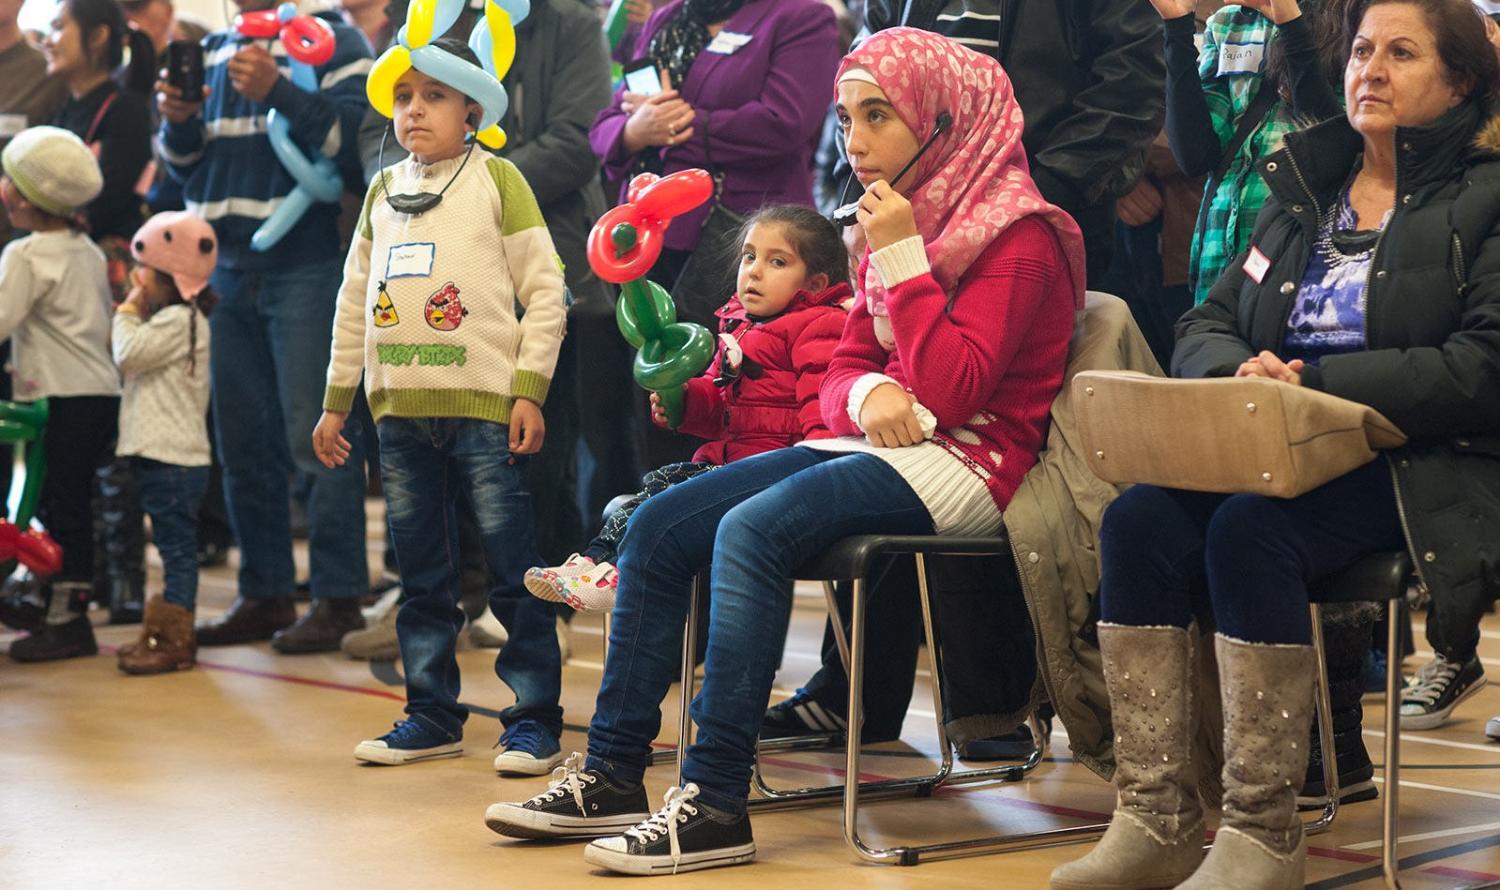 A refugee reception event in Prince Edward Island, Canada, March 2016 (Photo: Flickr/Government of Prince Edward Island)